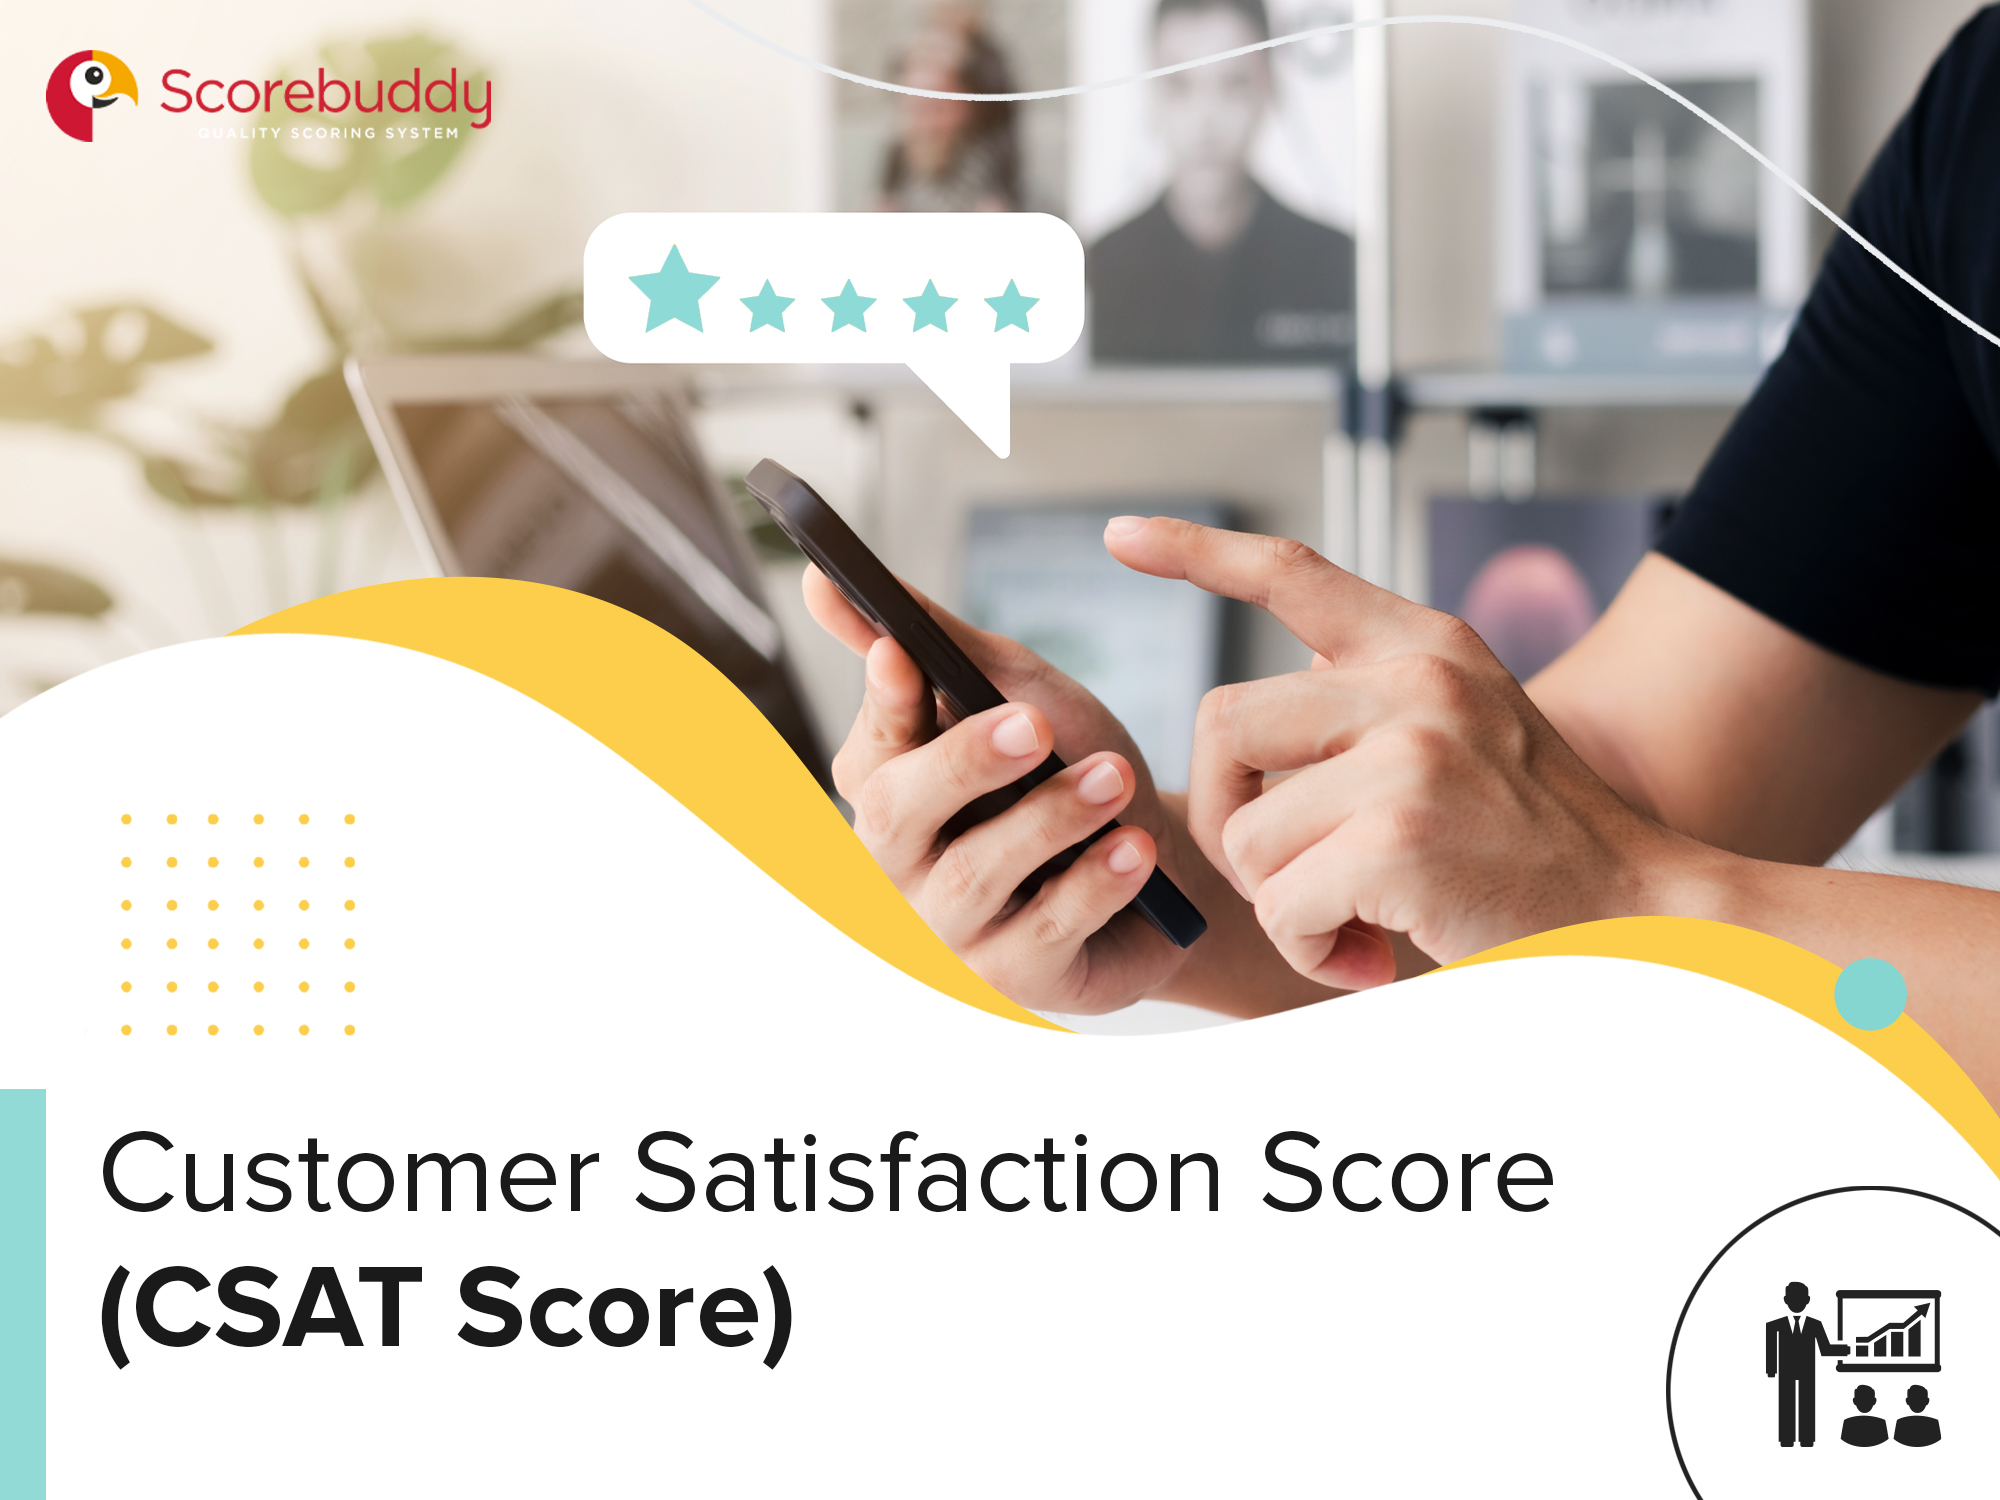 What is CSAT Score and How to Calculate it?